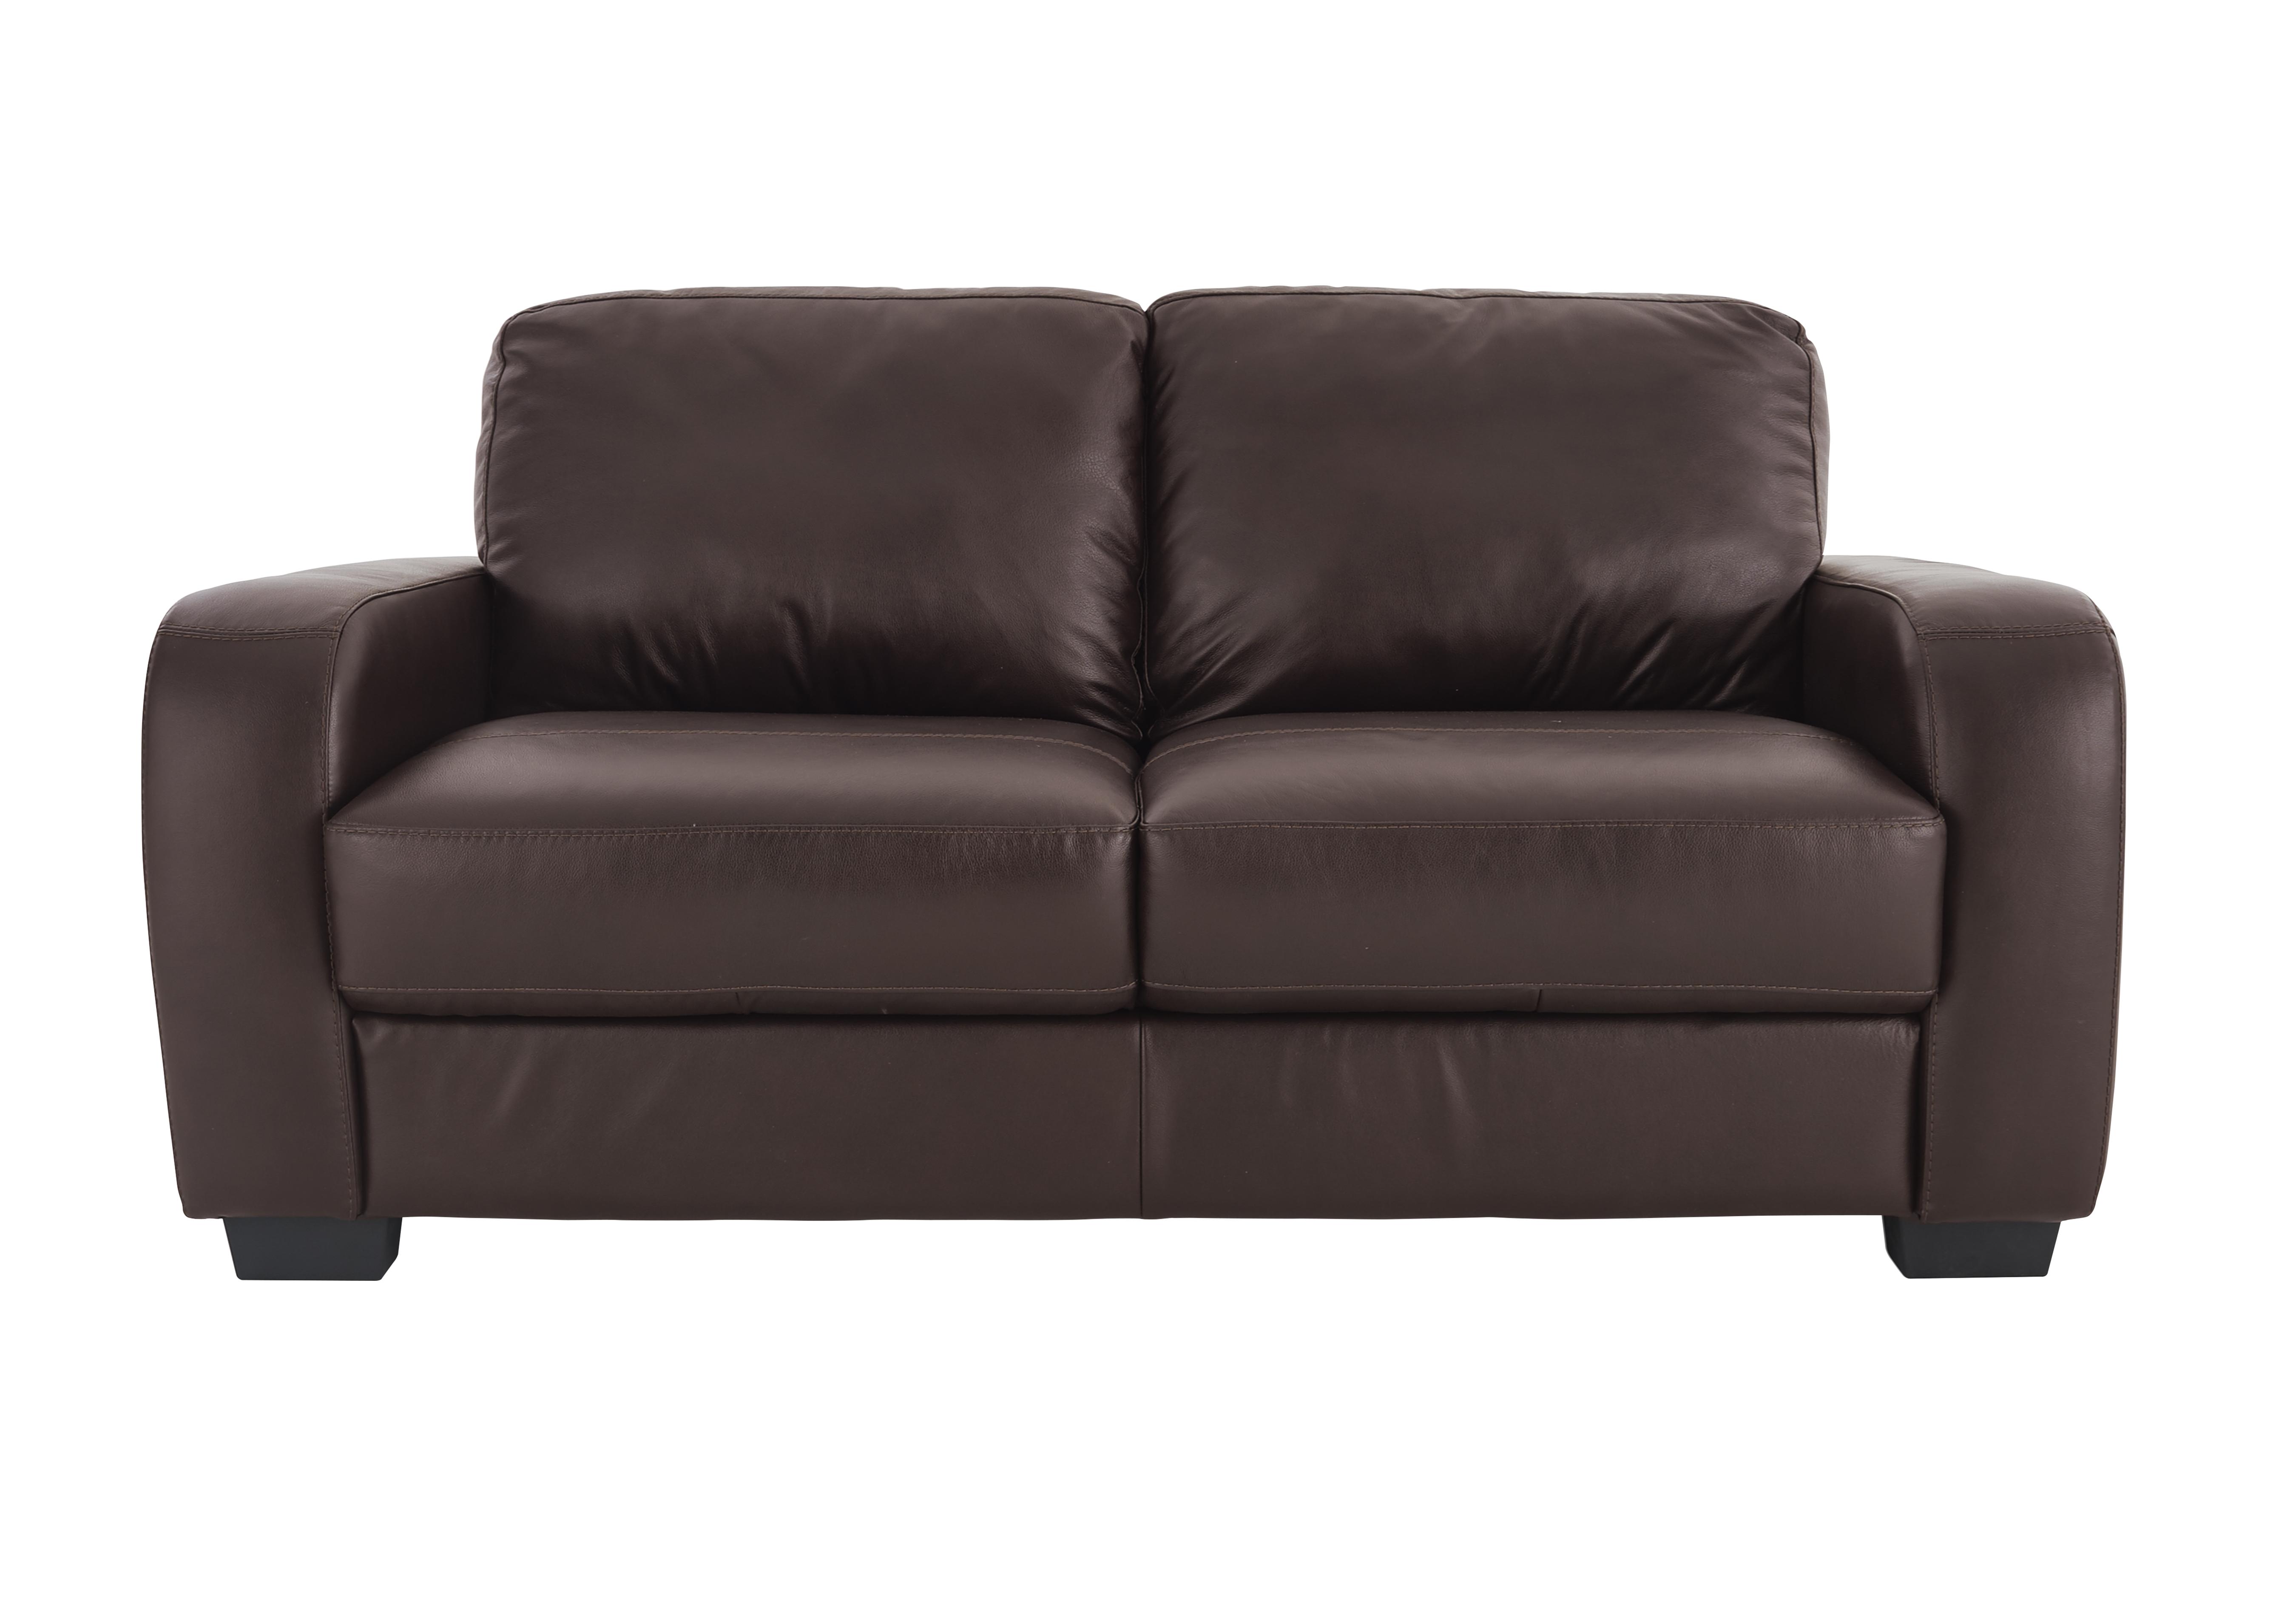 astor 2.5 seater leather sofa bed